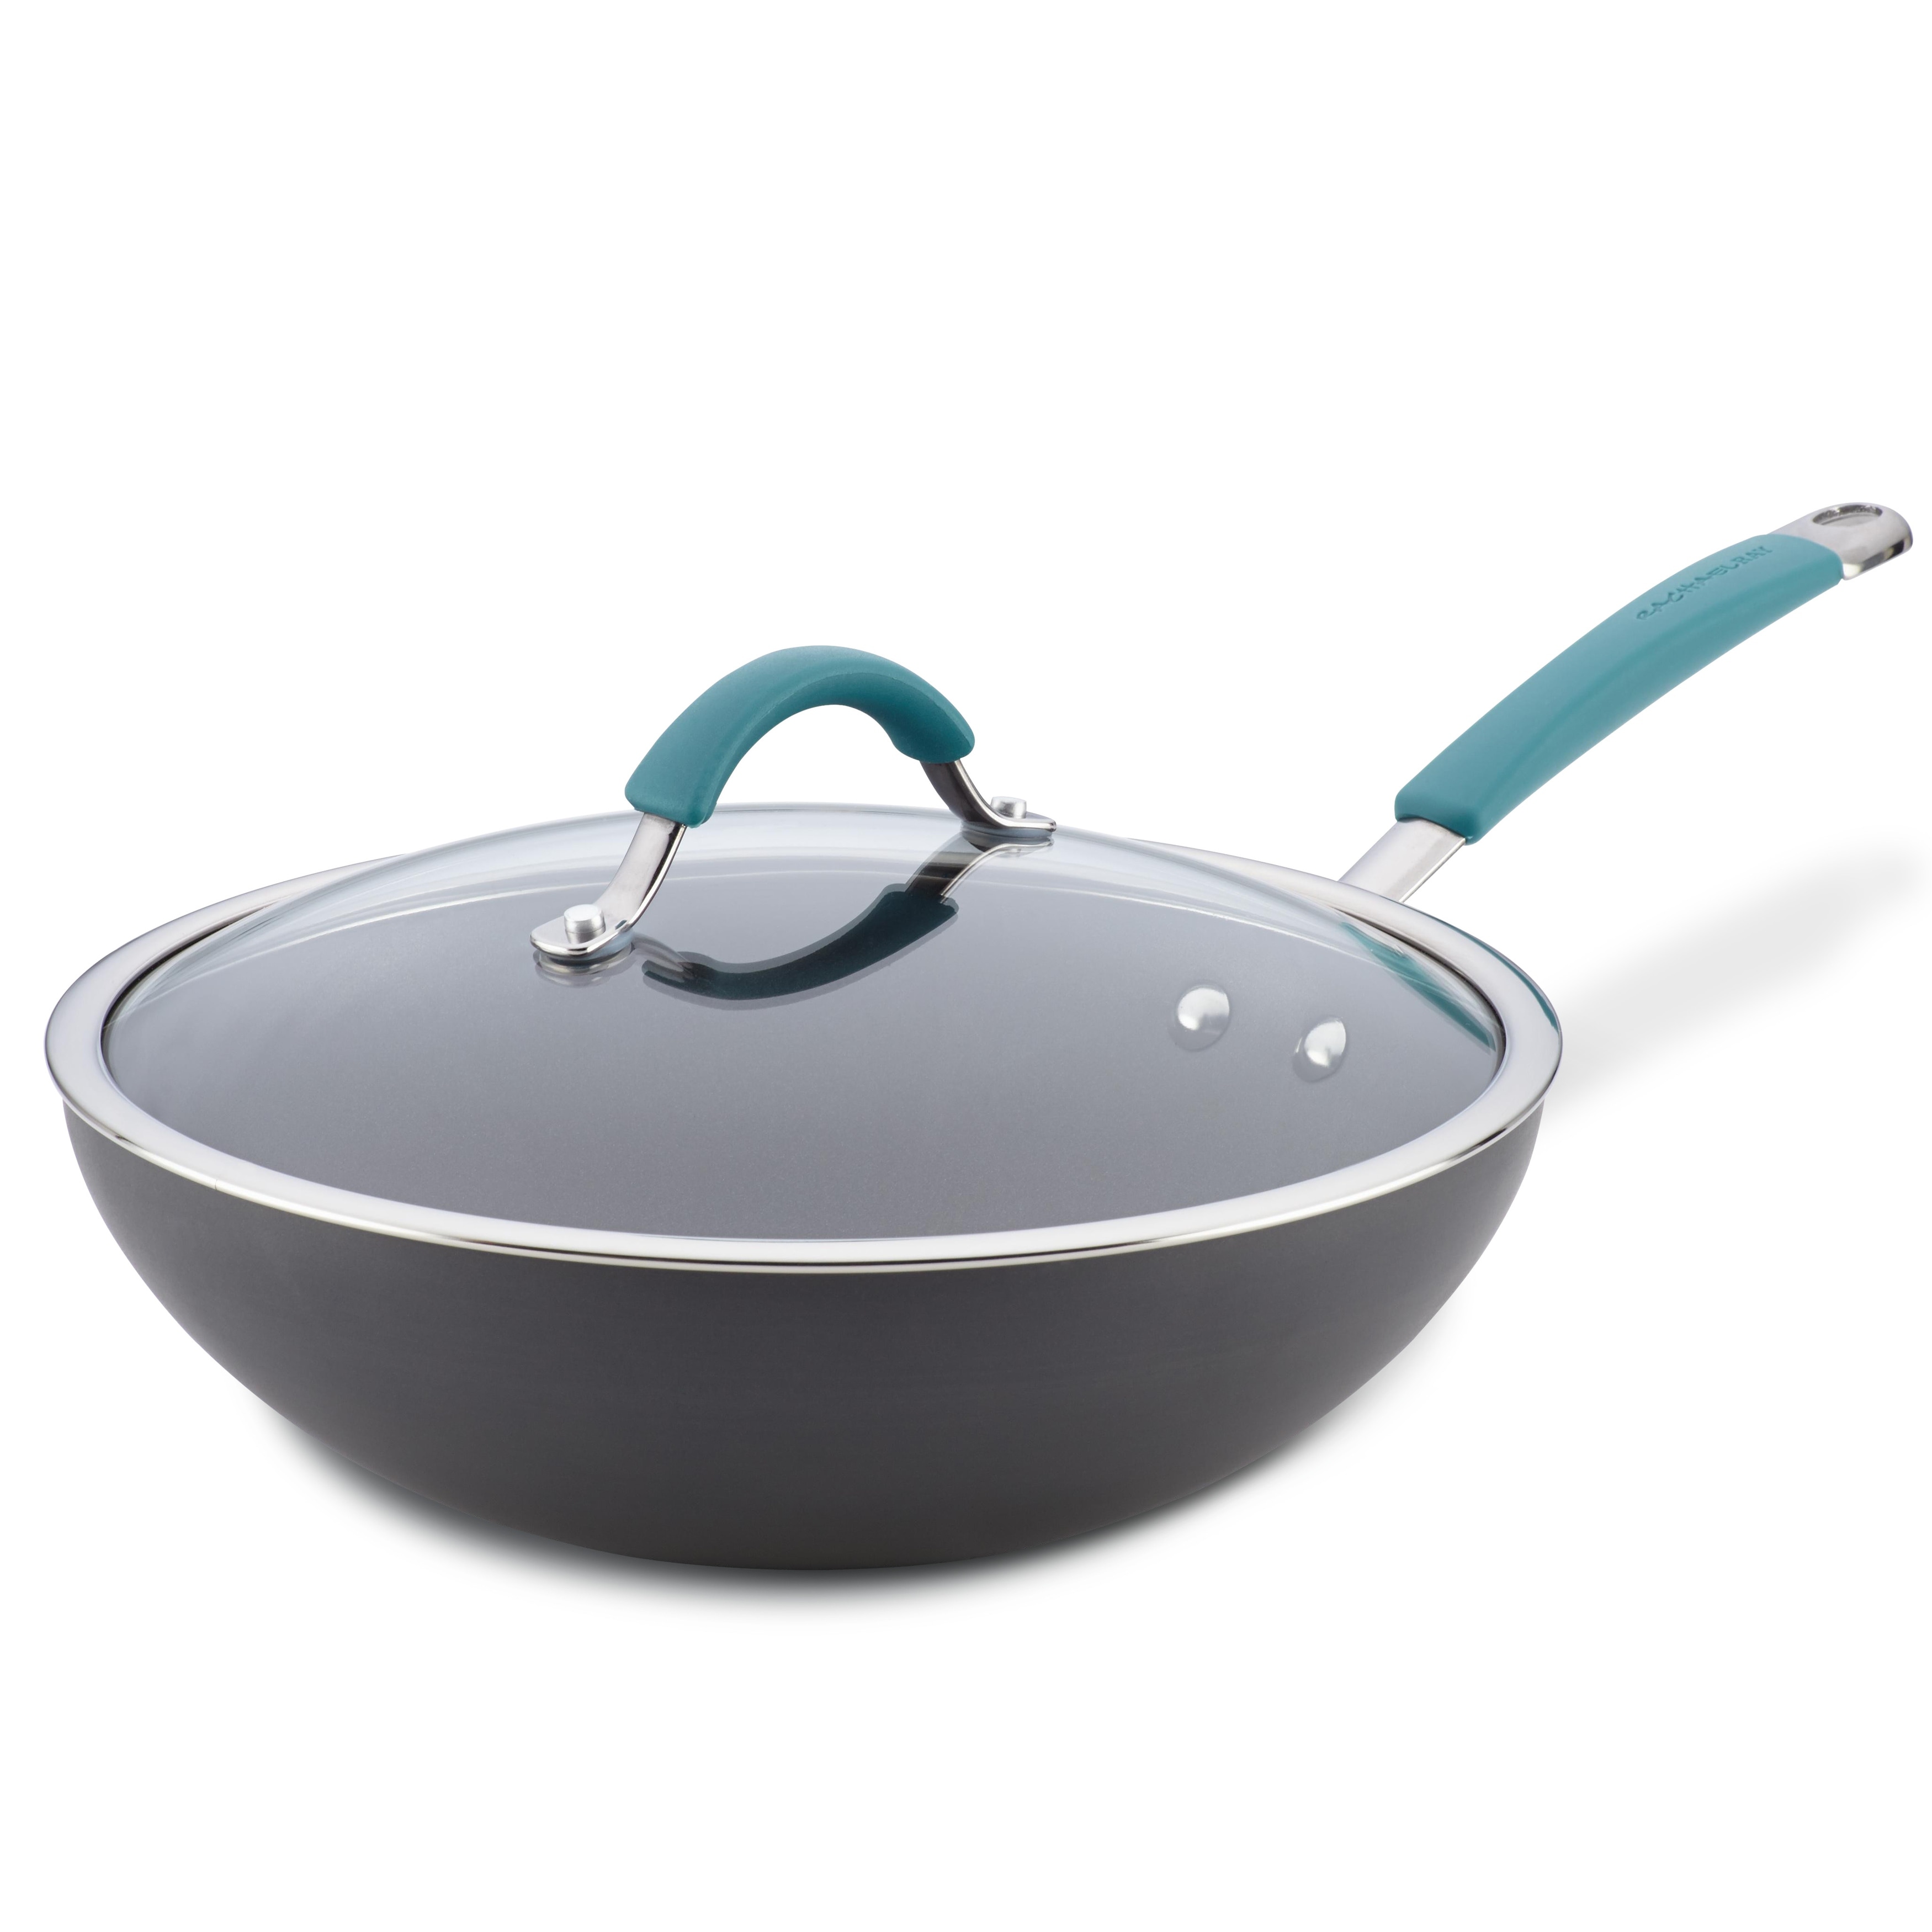 Top Product Reviews for Rachael Ray Cucina Hard-Anodized Nonstick Stir Fry  Pan with Lid, 11-Inch, Gray, Agave Blue Handles 9238558 Bed Bath   Beyond